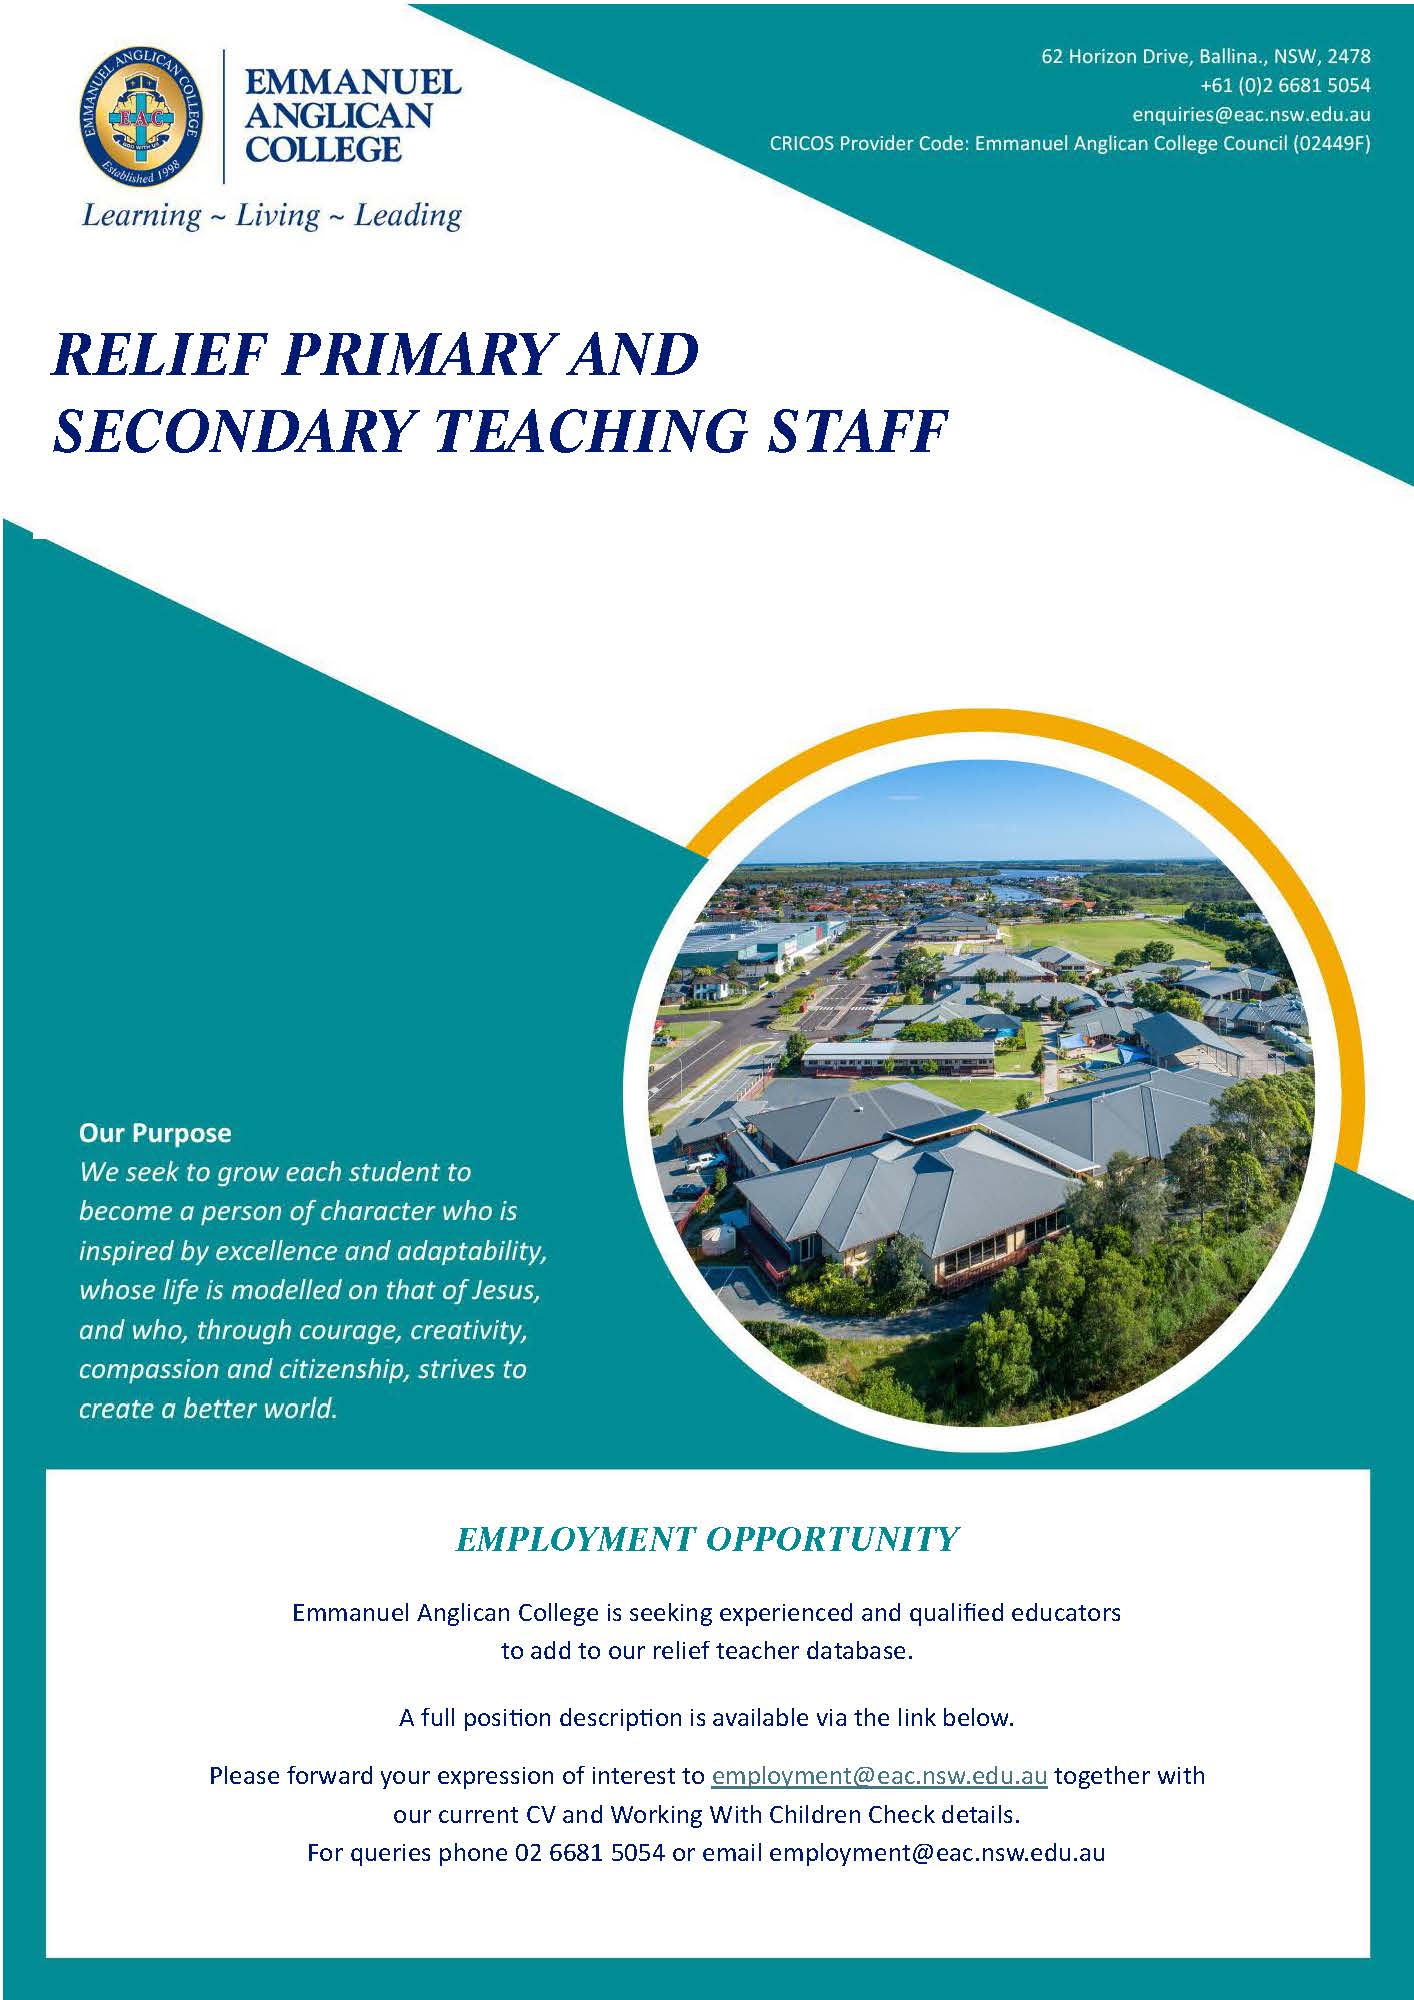 Relief Primary and Secondary Teaching Staff